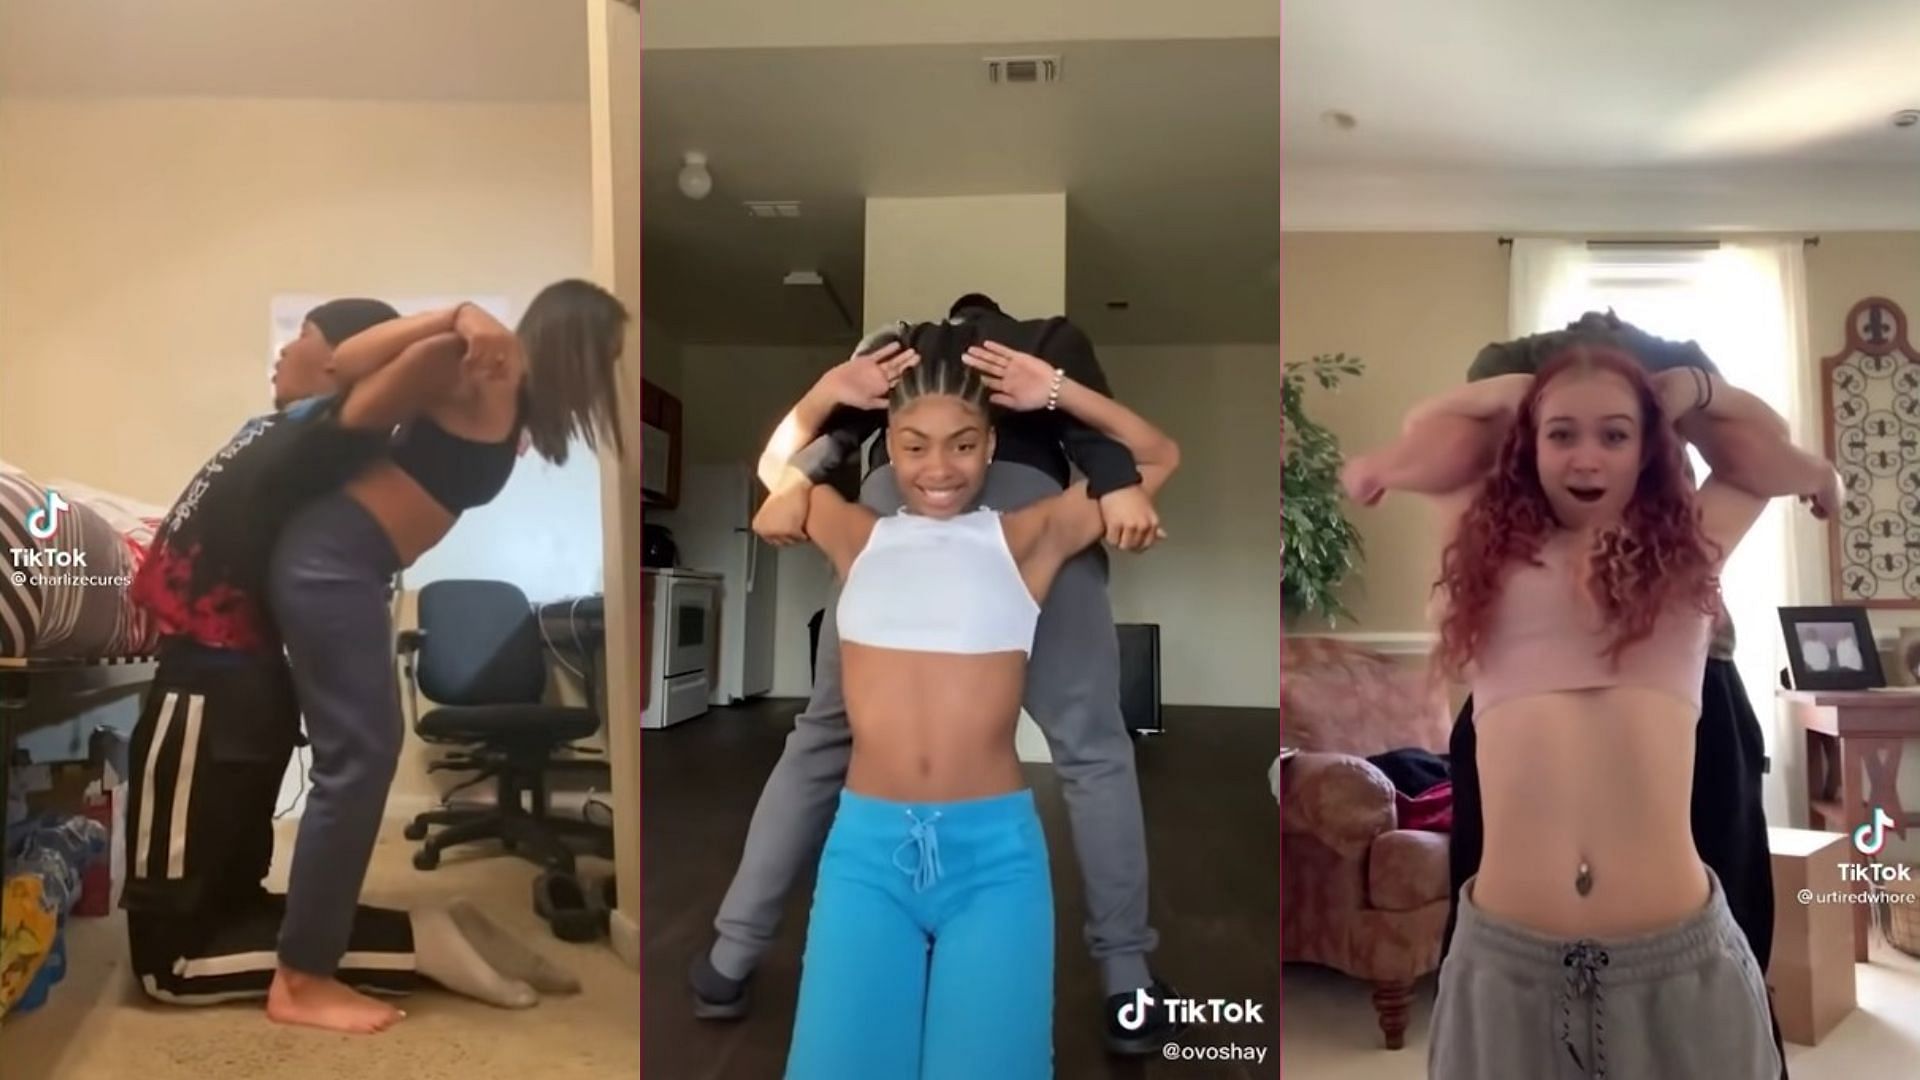 Doctors say the Back Cracking Challenge can be very detrimental to the spine (Images via charlizecures/TikTok, ovashay/TikTok, and urtiredwh*re/TikTok)